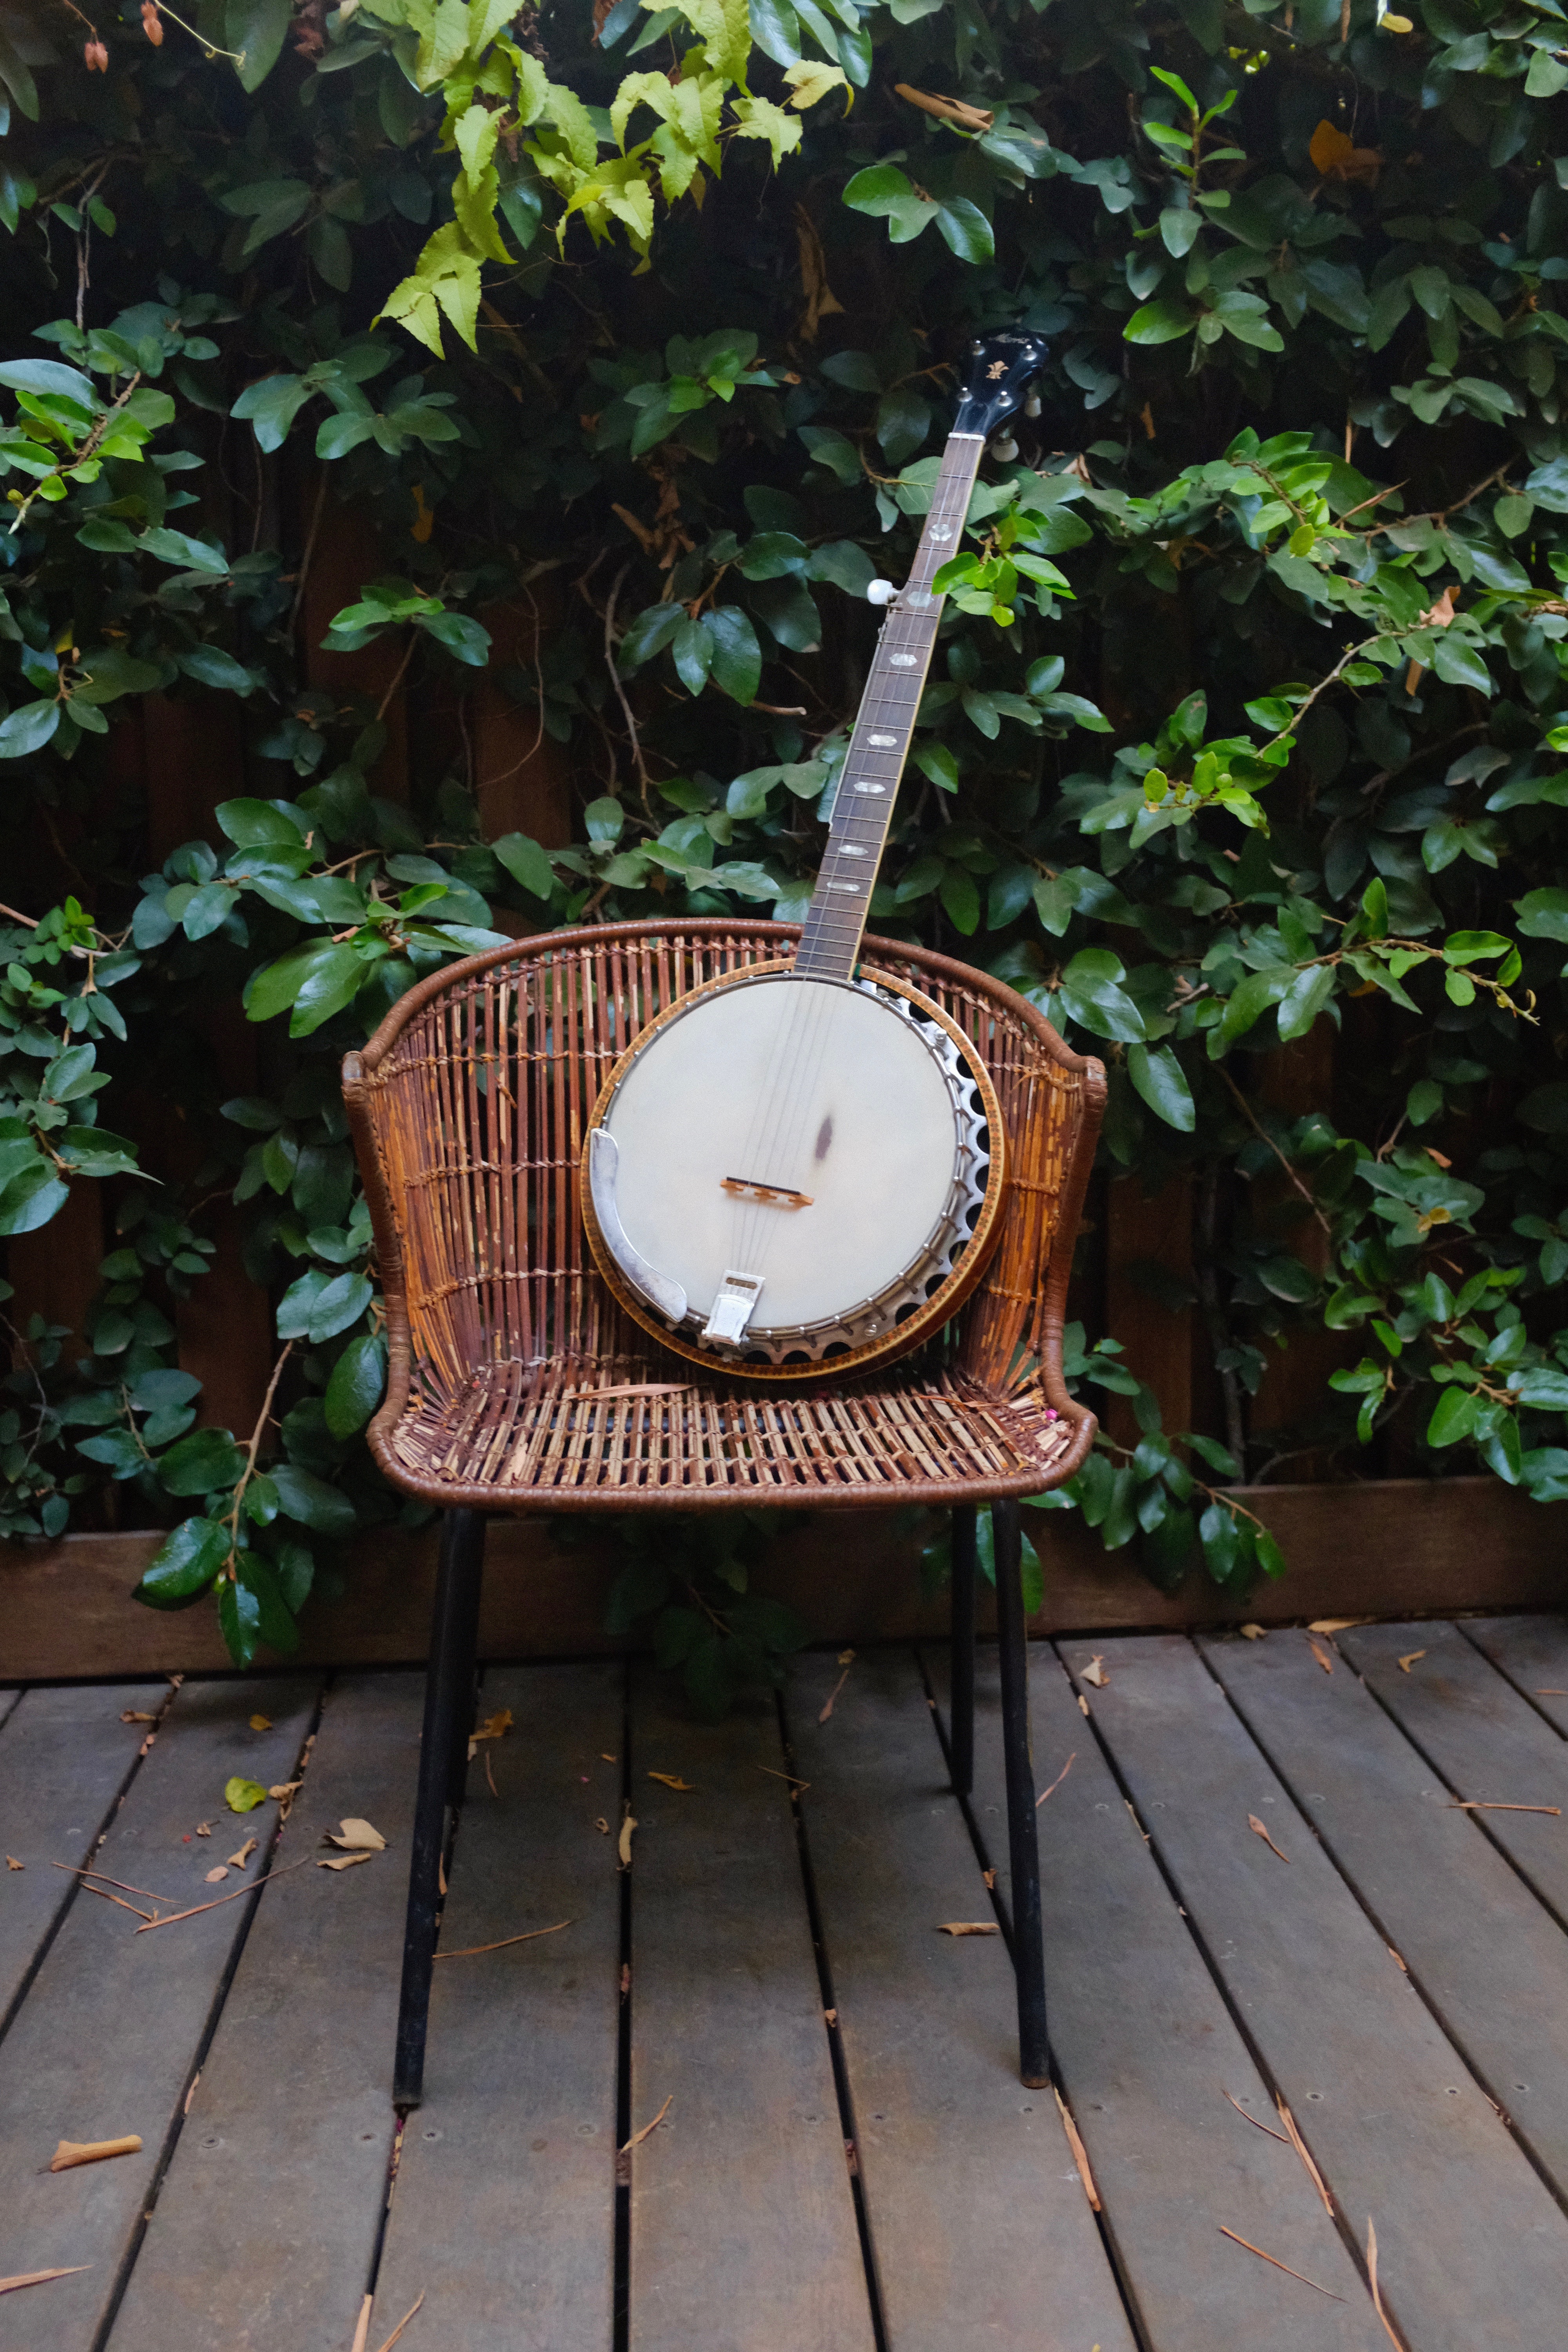 sold-back banjo on wicker chair in front of greenery